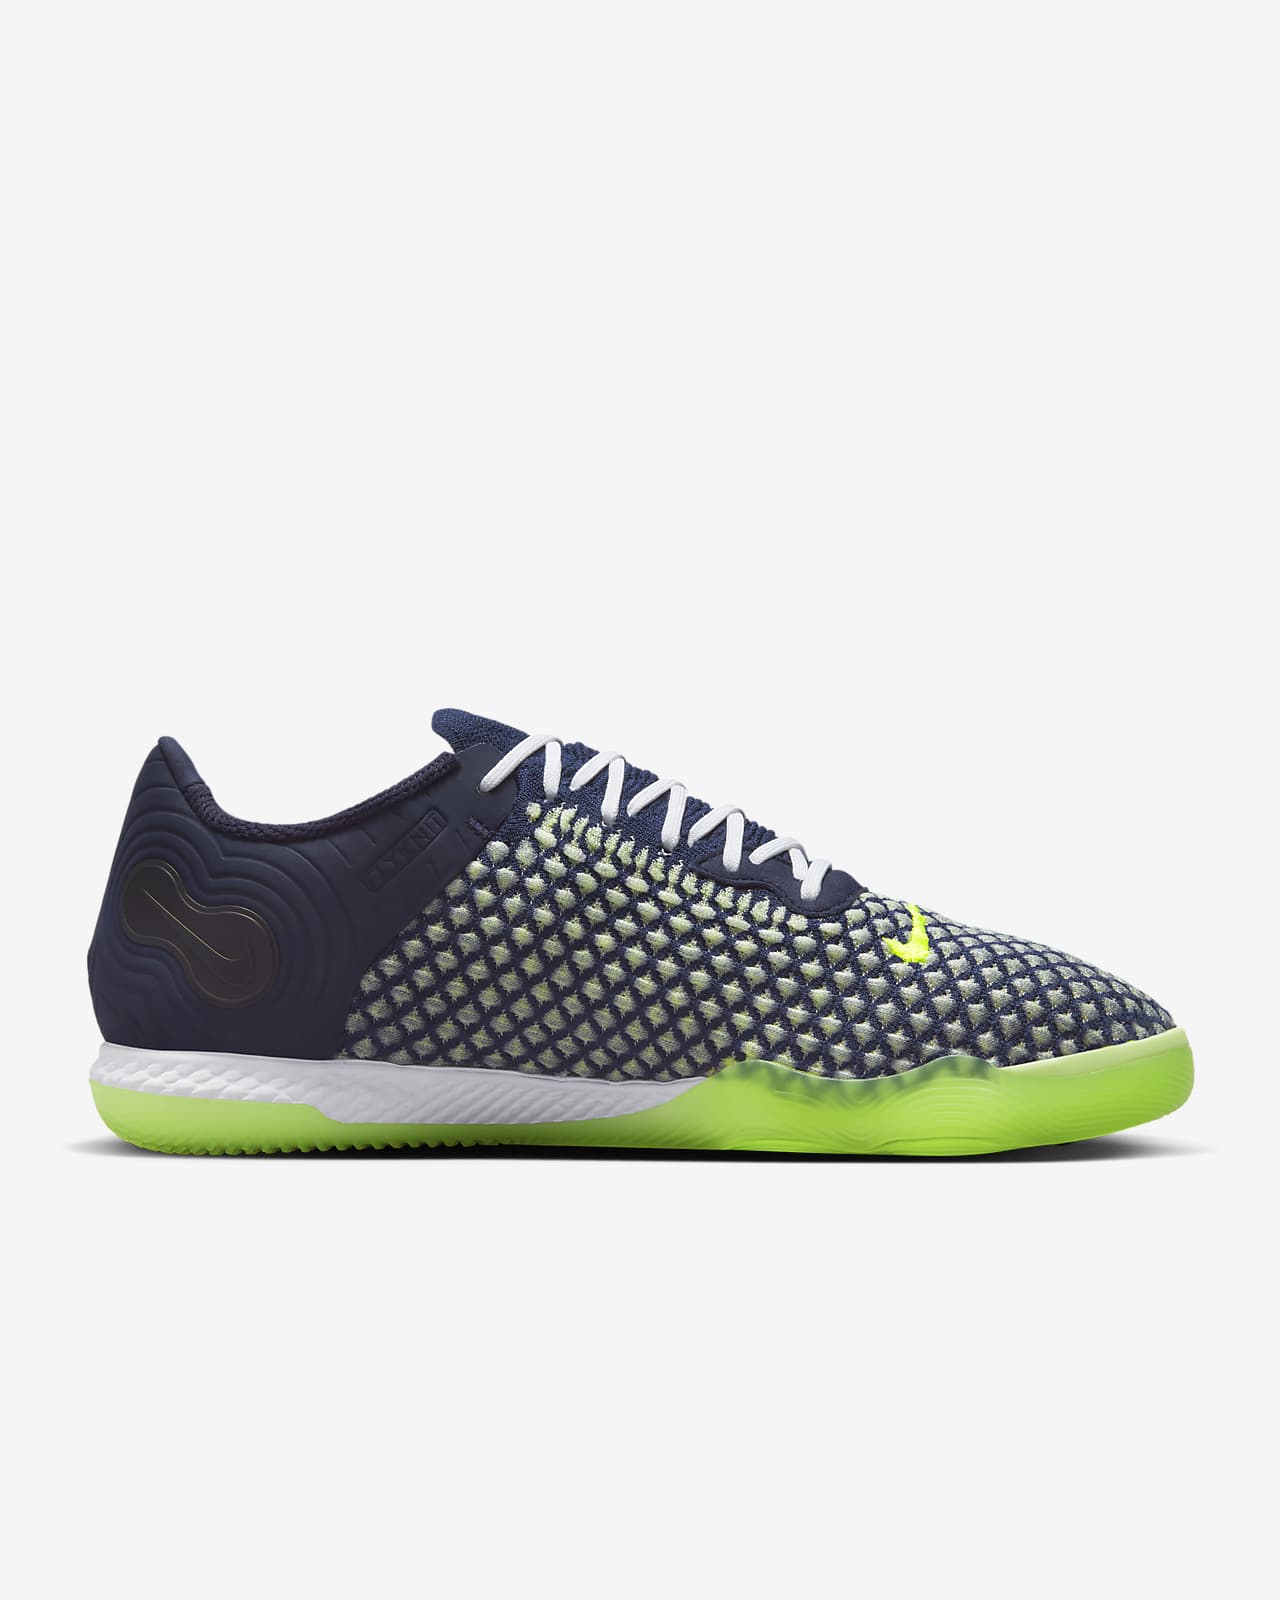 React Gato Indoor Court Football Shoes. ID